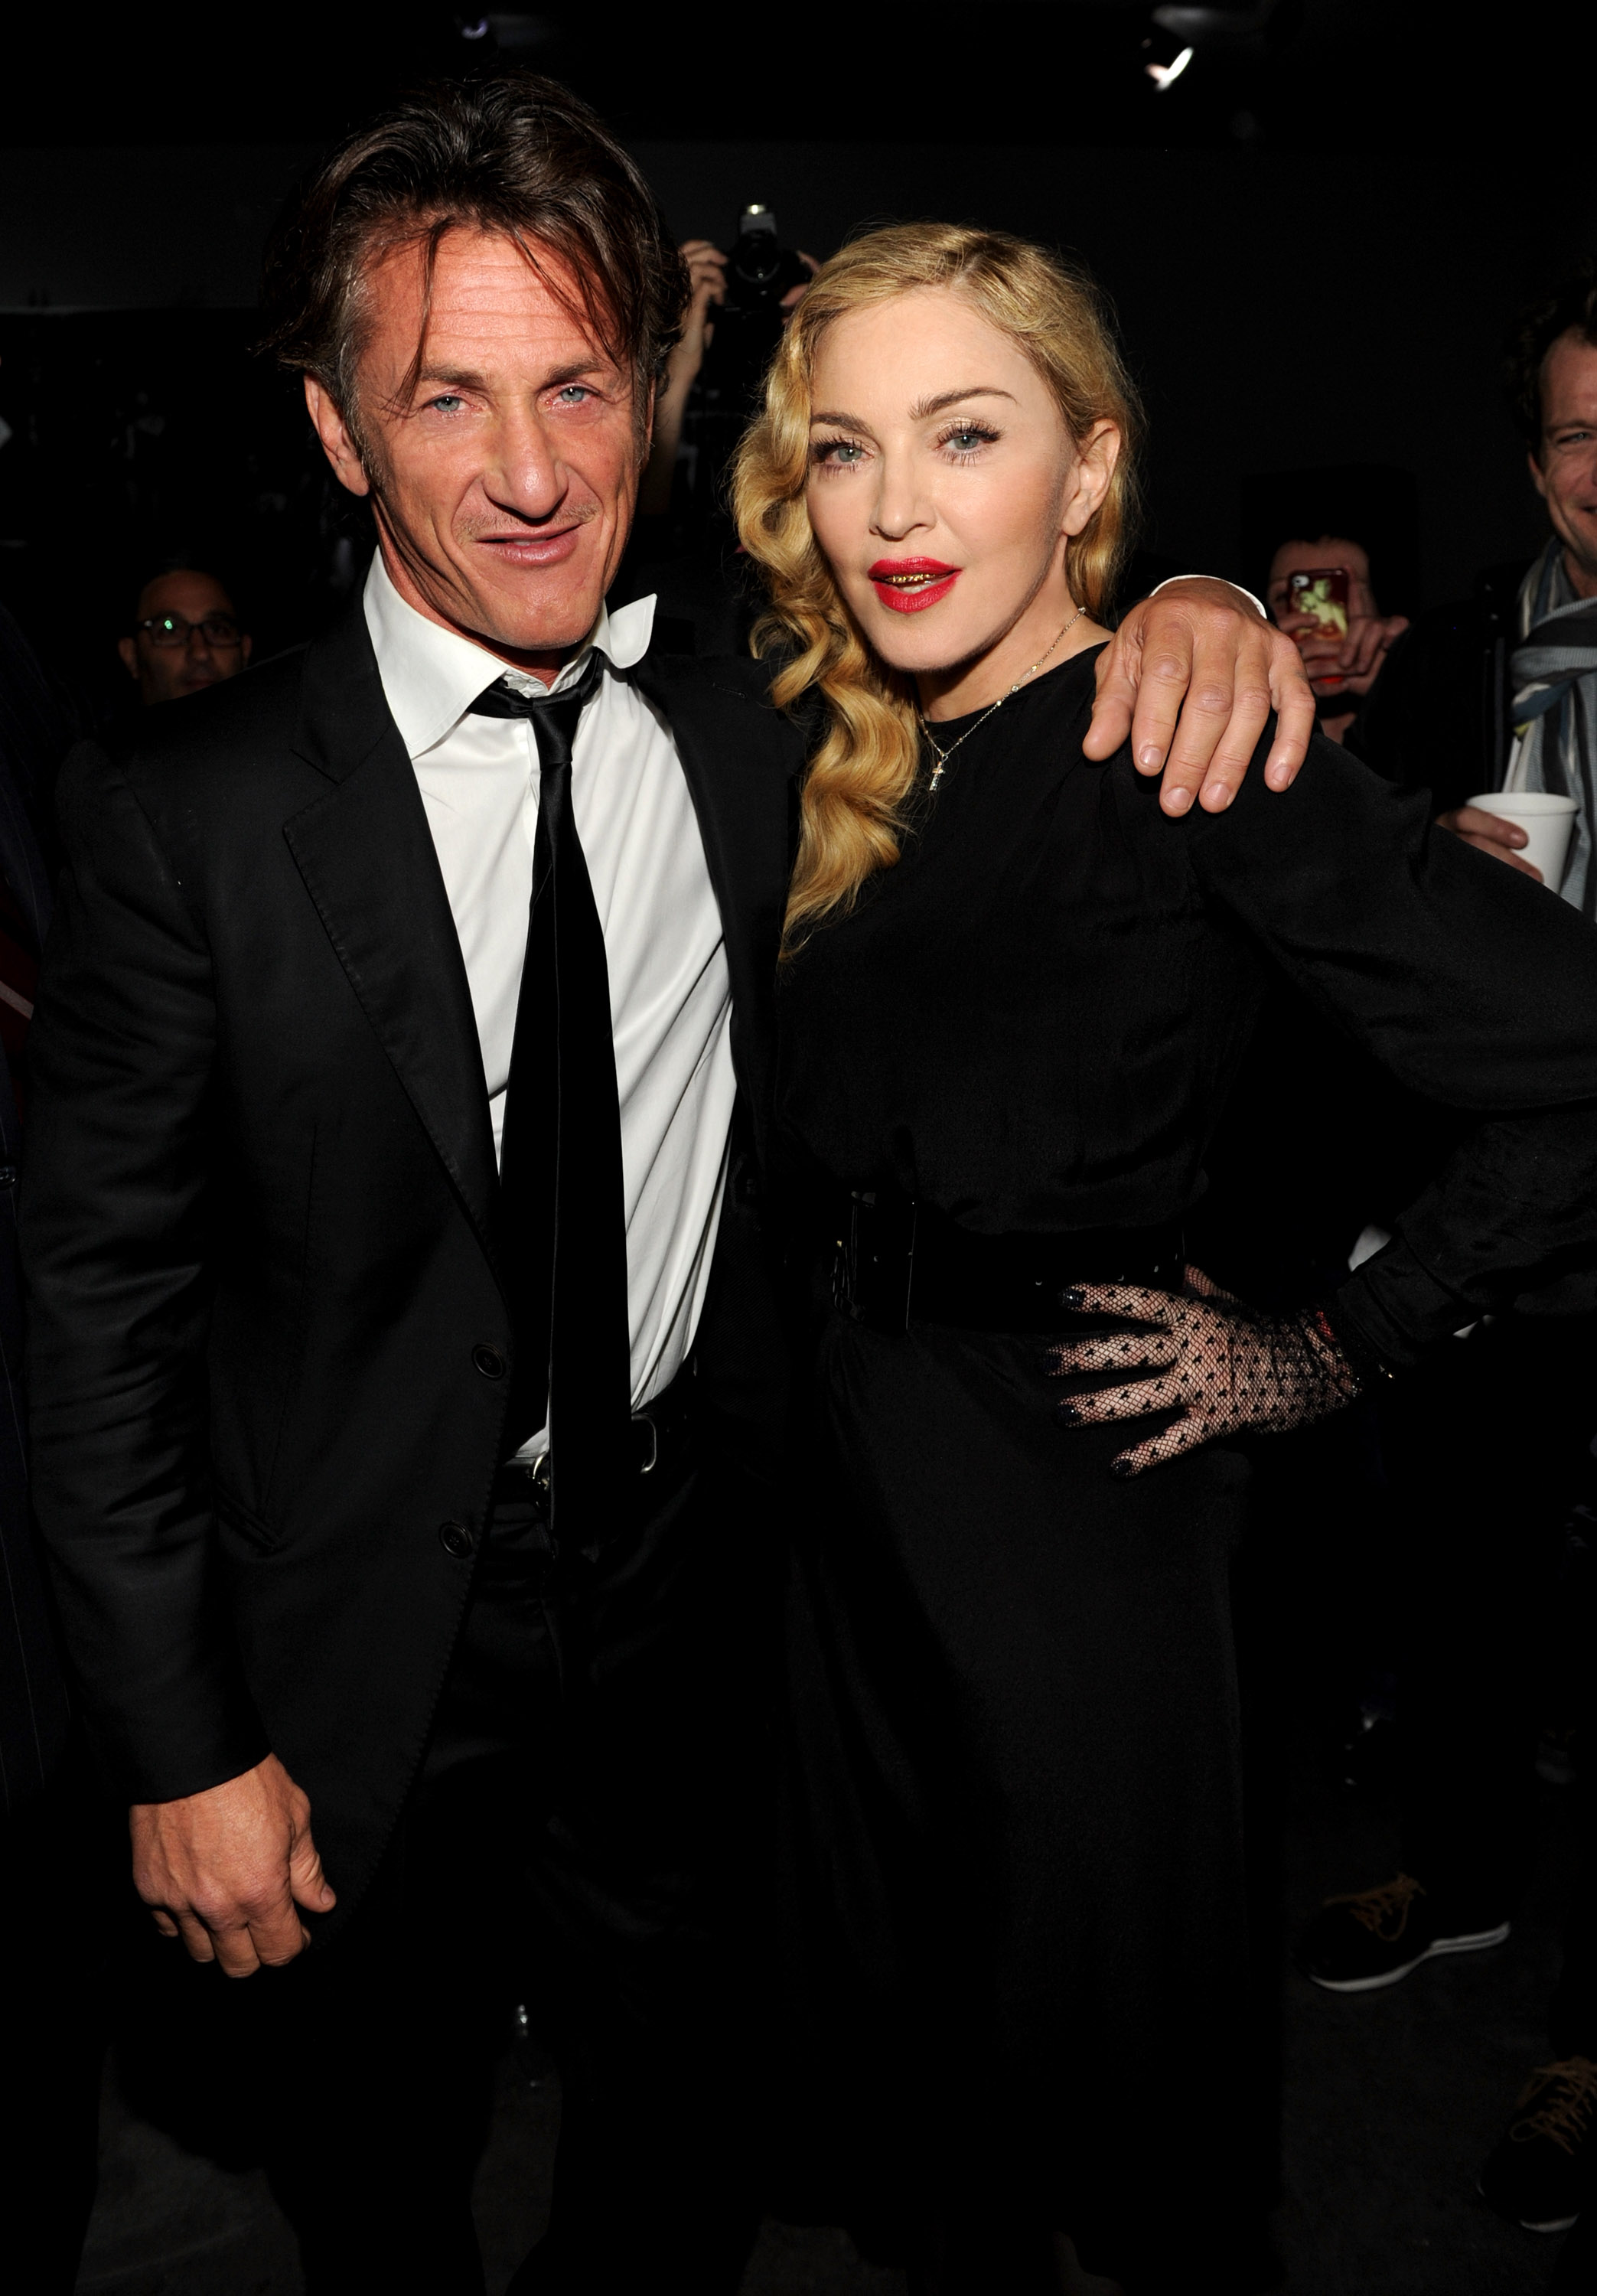 Madonna and Sean Penn at the Gagosian Gallery on September 24, 2013 in New York City.